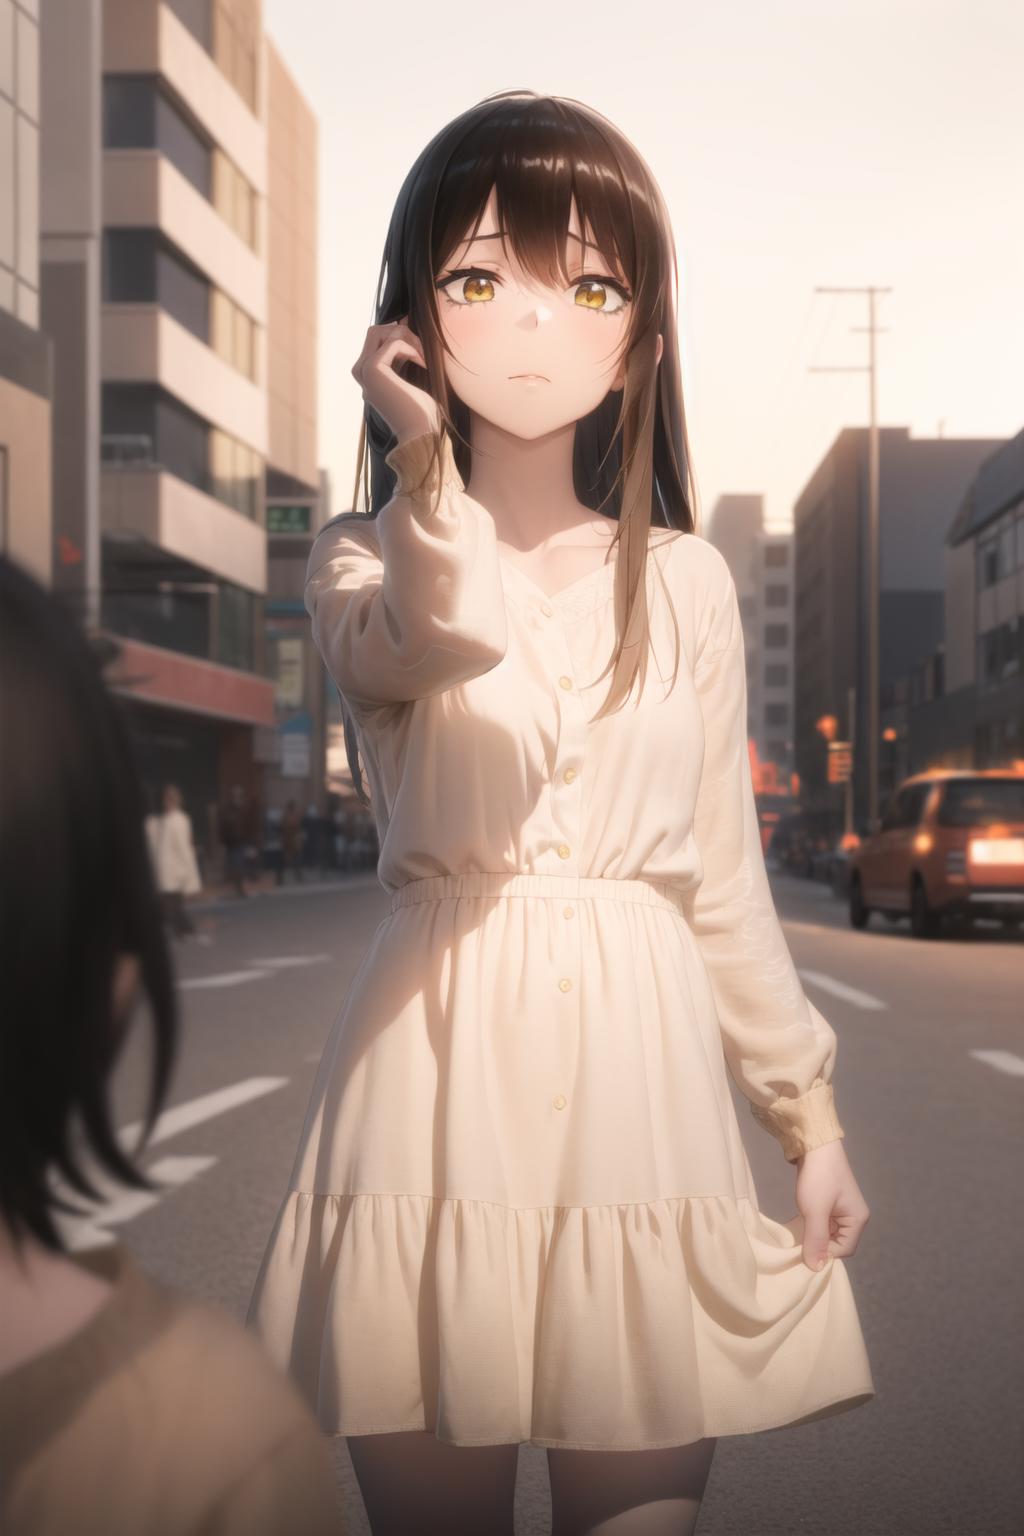 Linen dress - clothing image by psoft